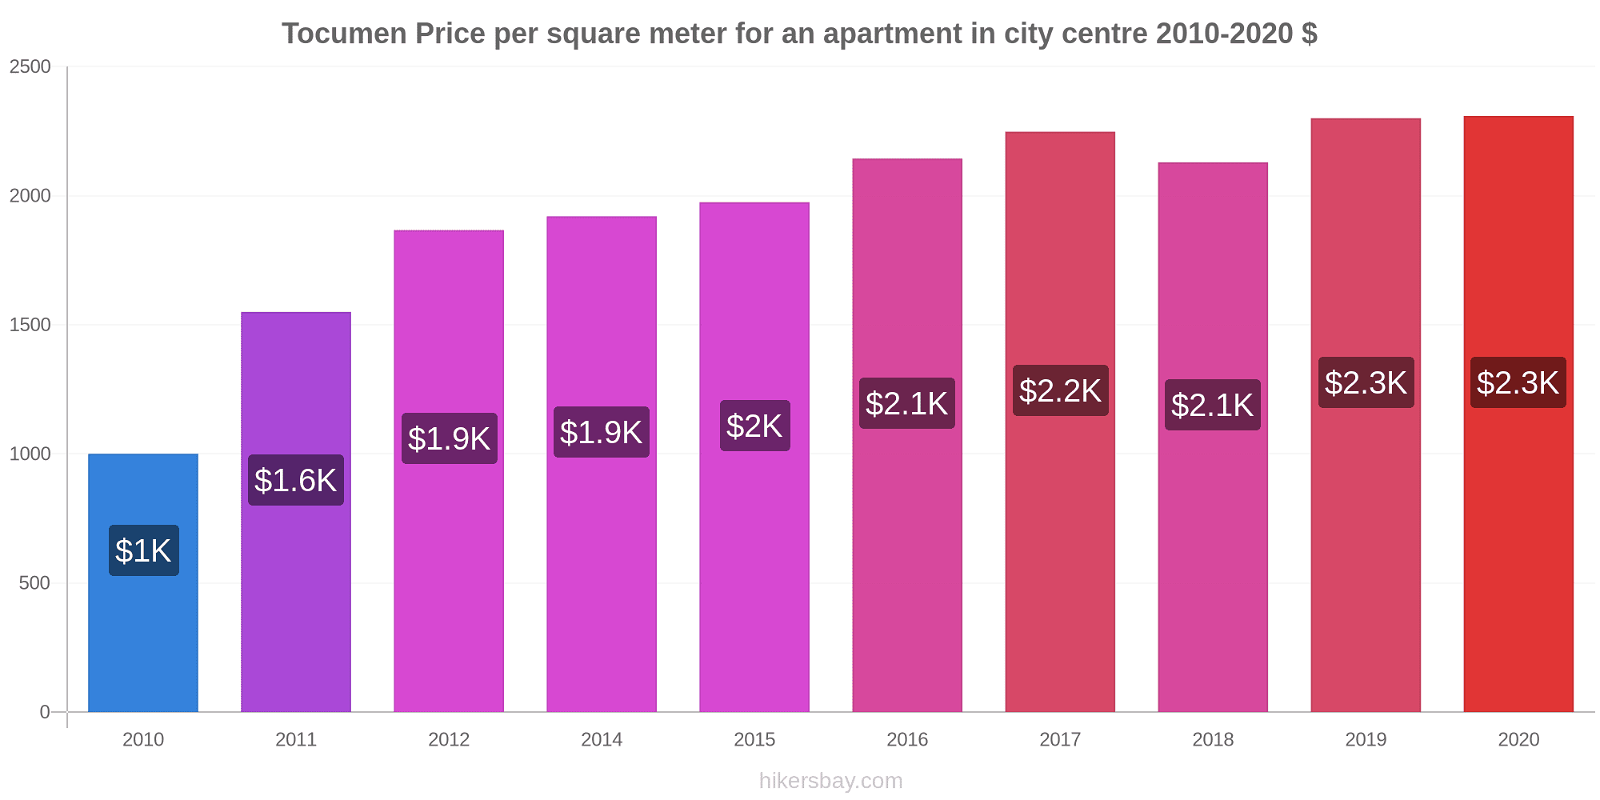 Tocumen price changes Price per square meter for an apartment in city centre hikersbay.com